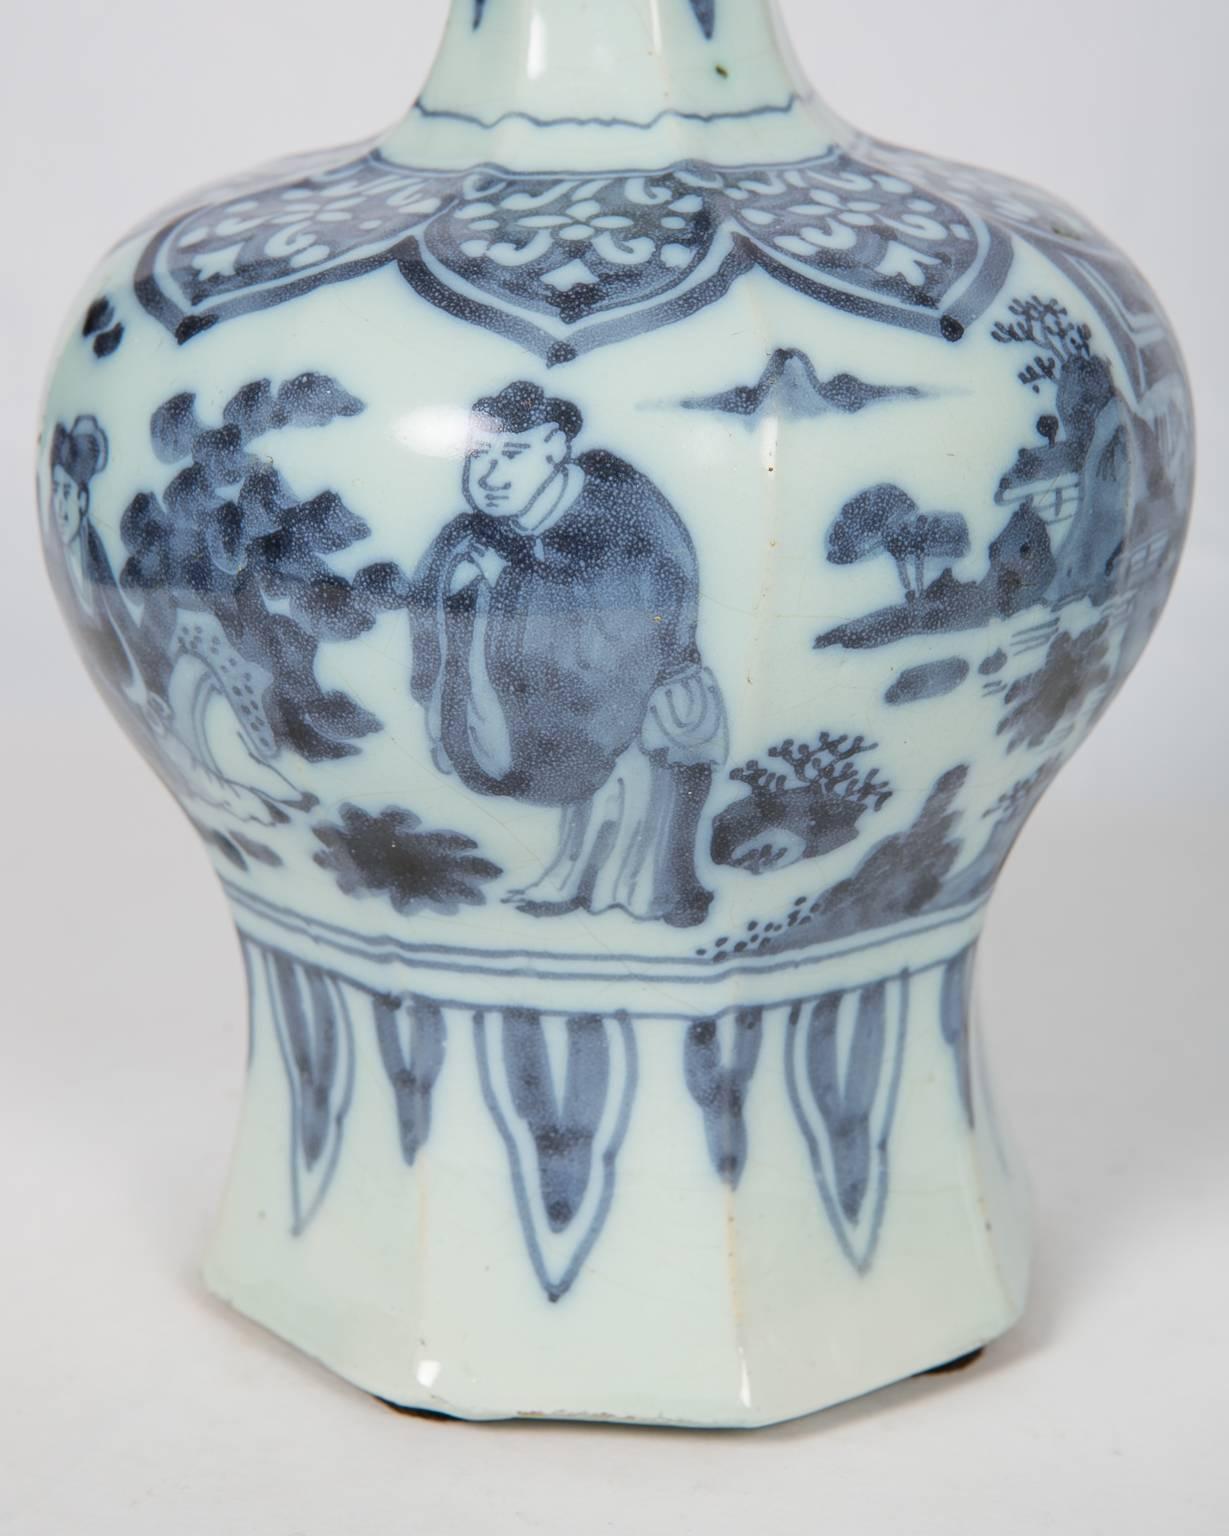 We are pleased to offer this matched pair of blue and white delft vases dates to the late 17th century. Each vase is decorated with figures and floral patterns. They share the same style of composition. Each long neck is painted with a flower branch